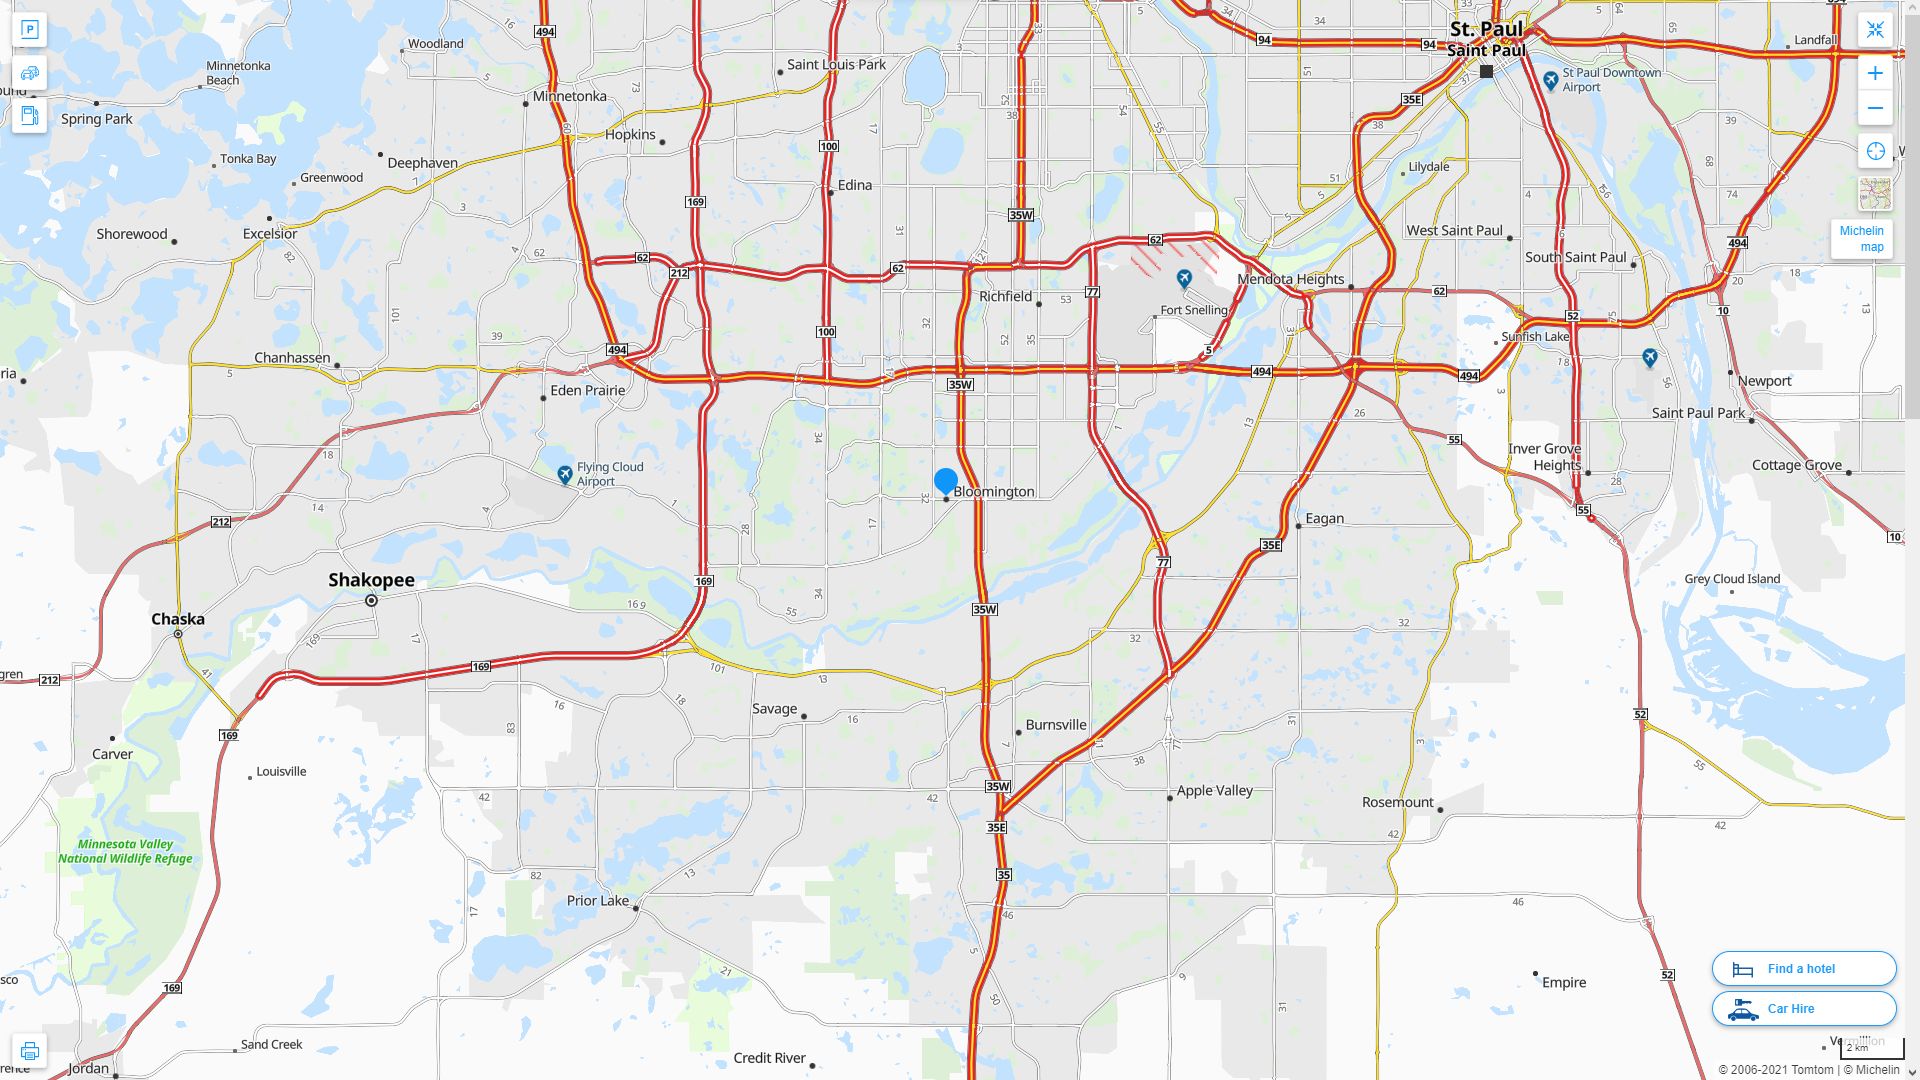 Bloomington Minnesota Highway and Road Map